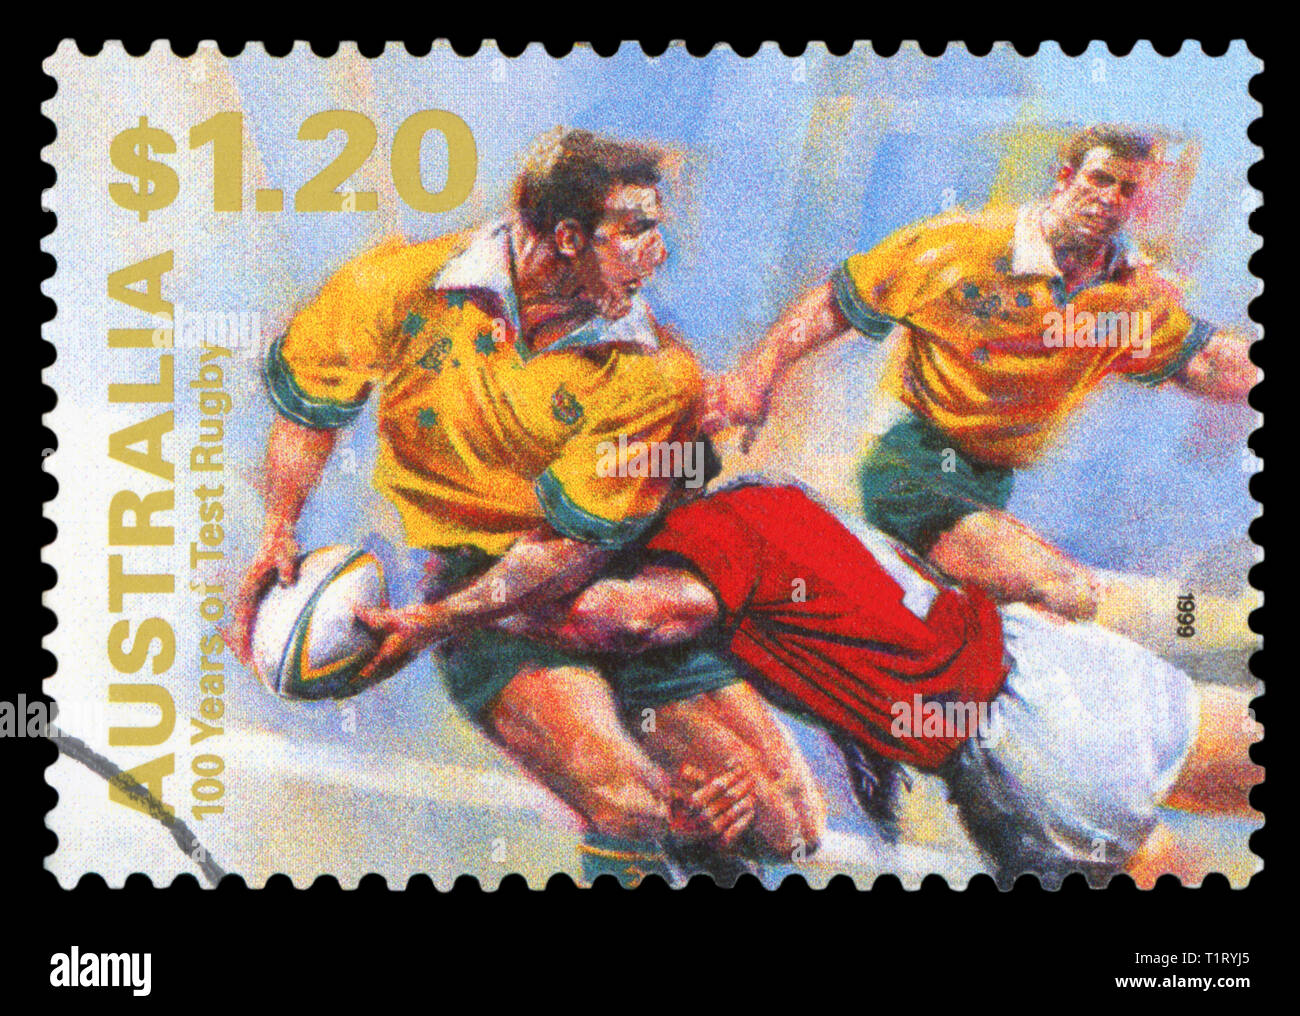 AUSTRALIA - CIRCA 1999: A postage stamp printed in Australia showing an image commemorative of 100 years of rugby, circa 1999. (Isolated on black) Stock Photo